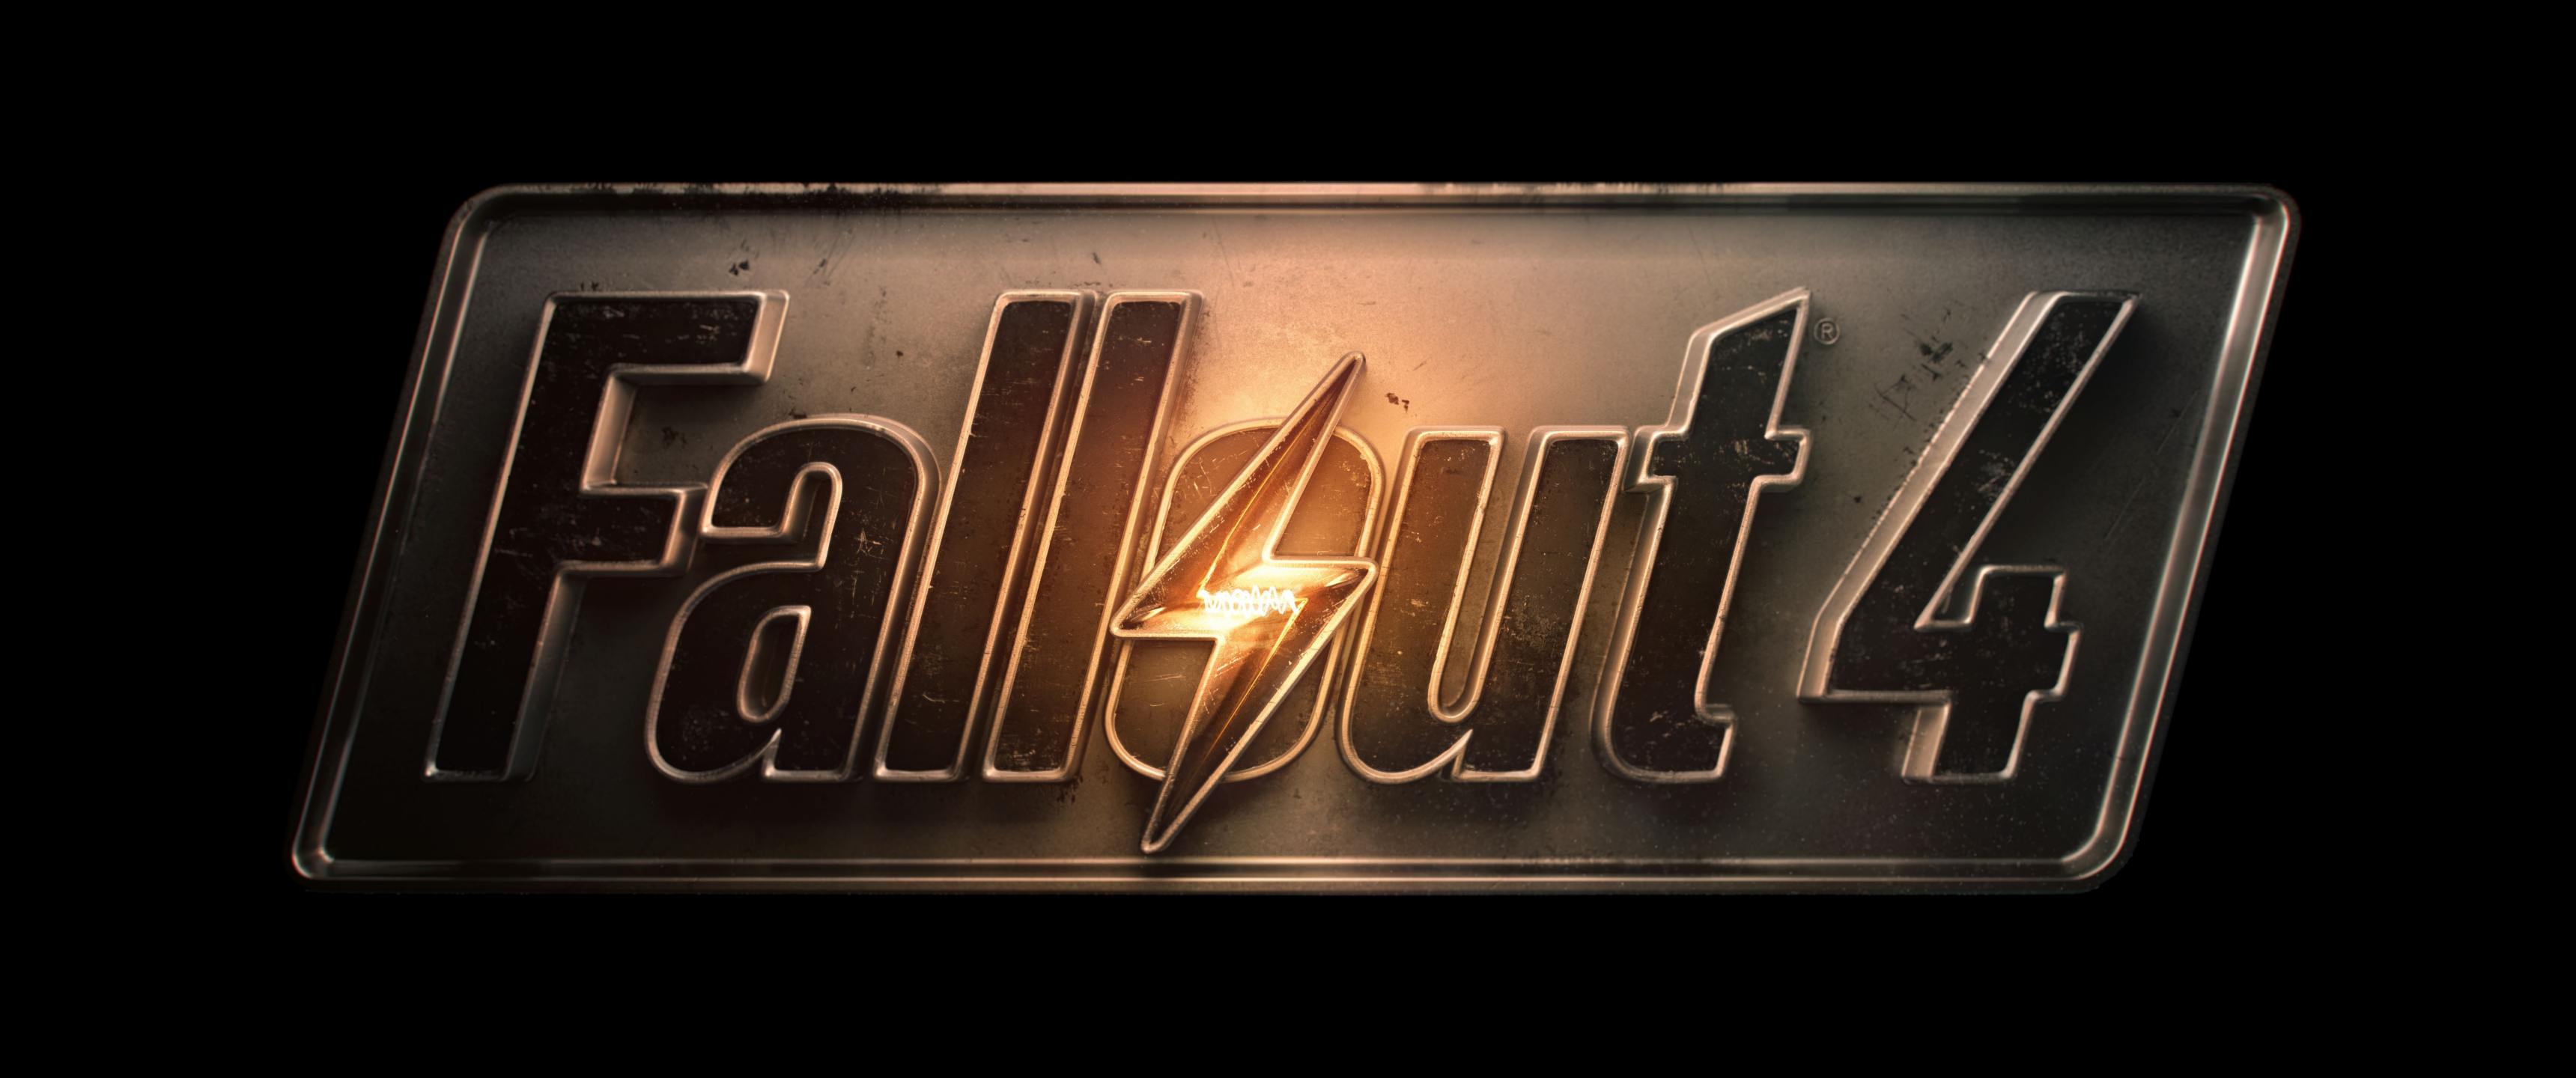 General 3440x1440 Fallout 4 video games PC gaming logo black background